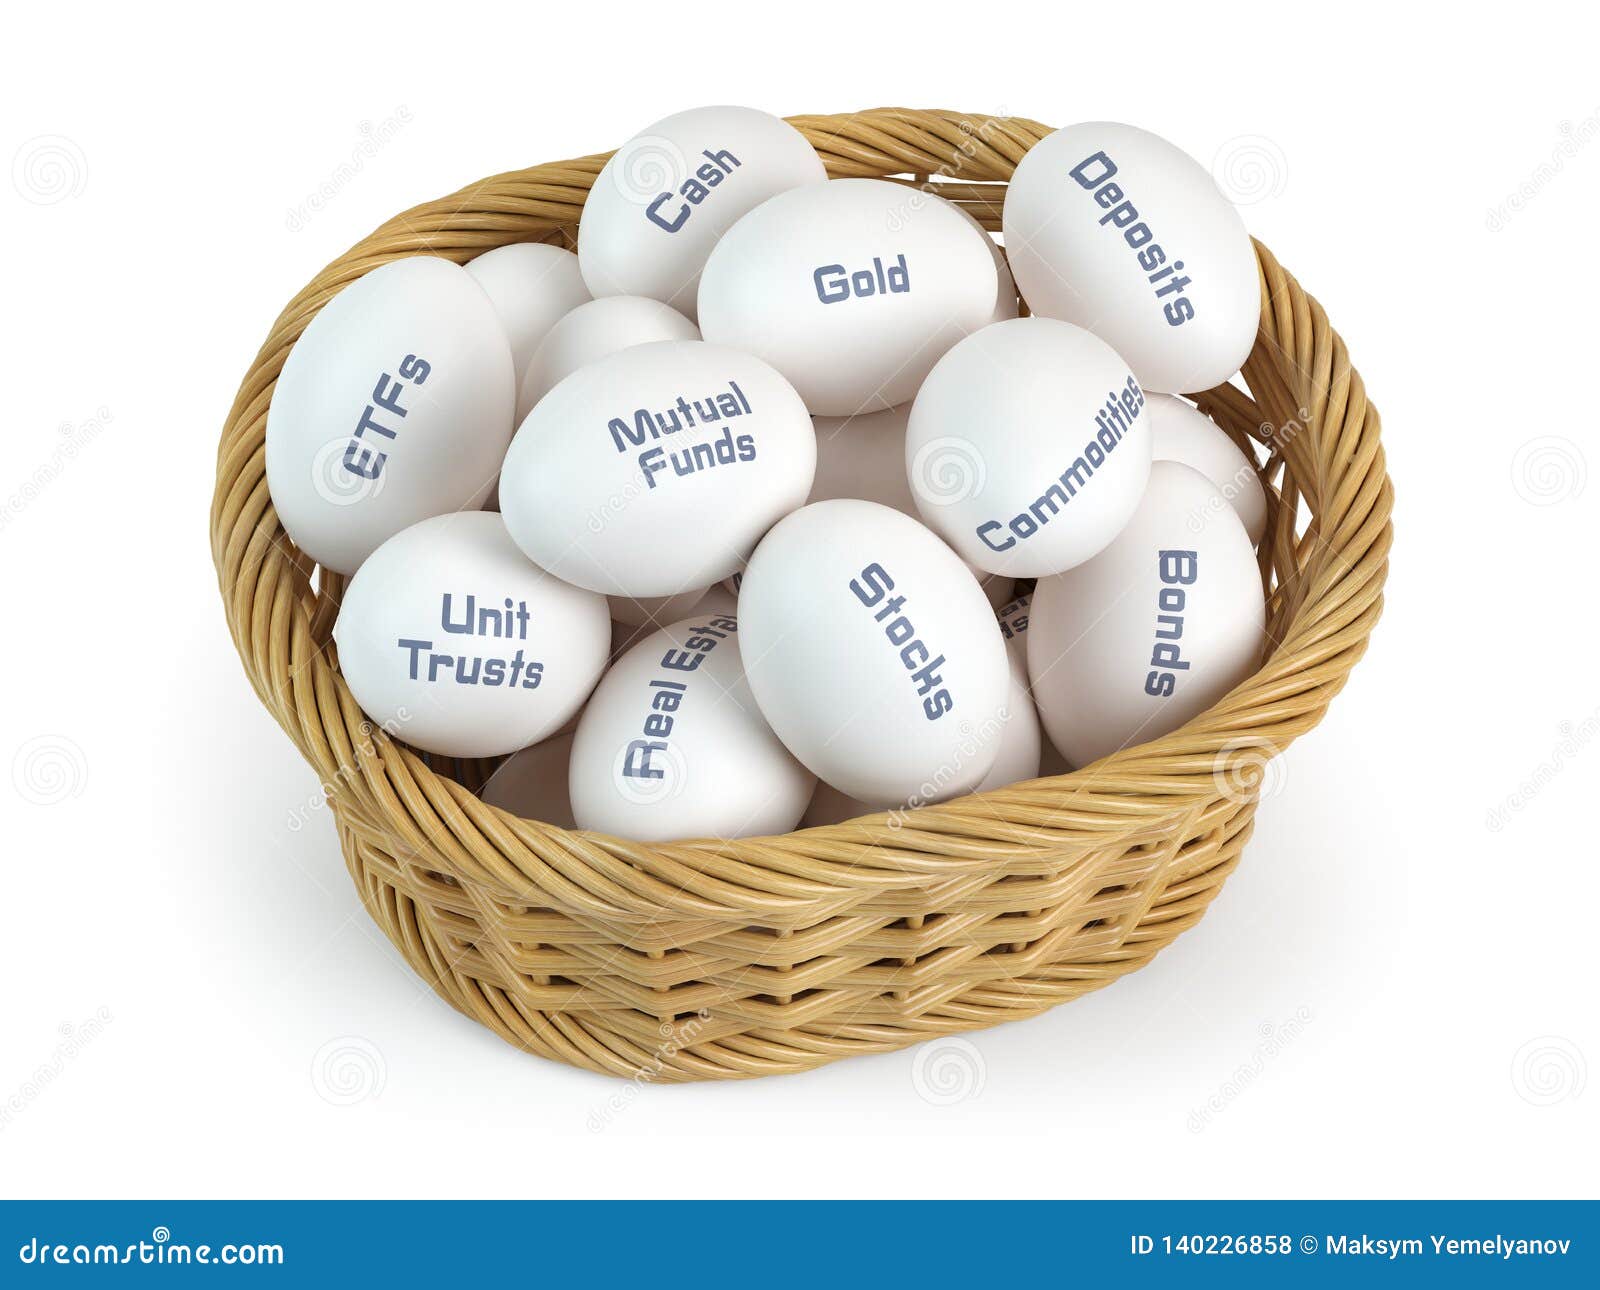 asset allocation, investment divesifacation and put all eggs in one basket concept. basket and eggs with different financial